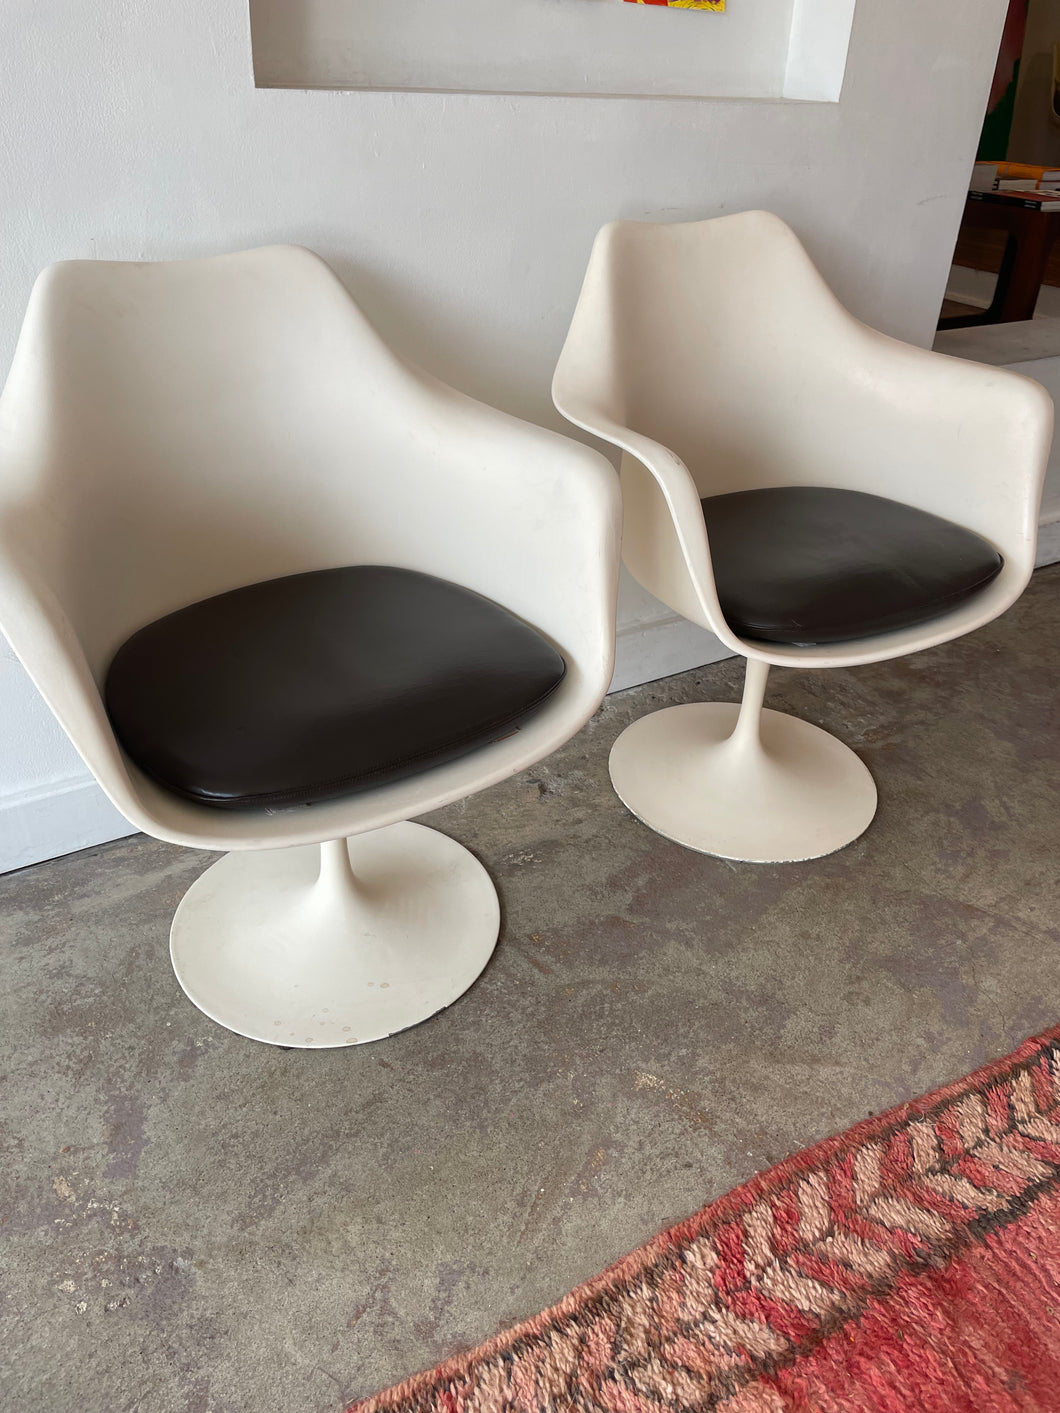 Vintage Authentic Eero Saarinen For Knoll Tulip Armchairs with Original Upholstered Cushion